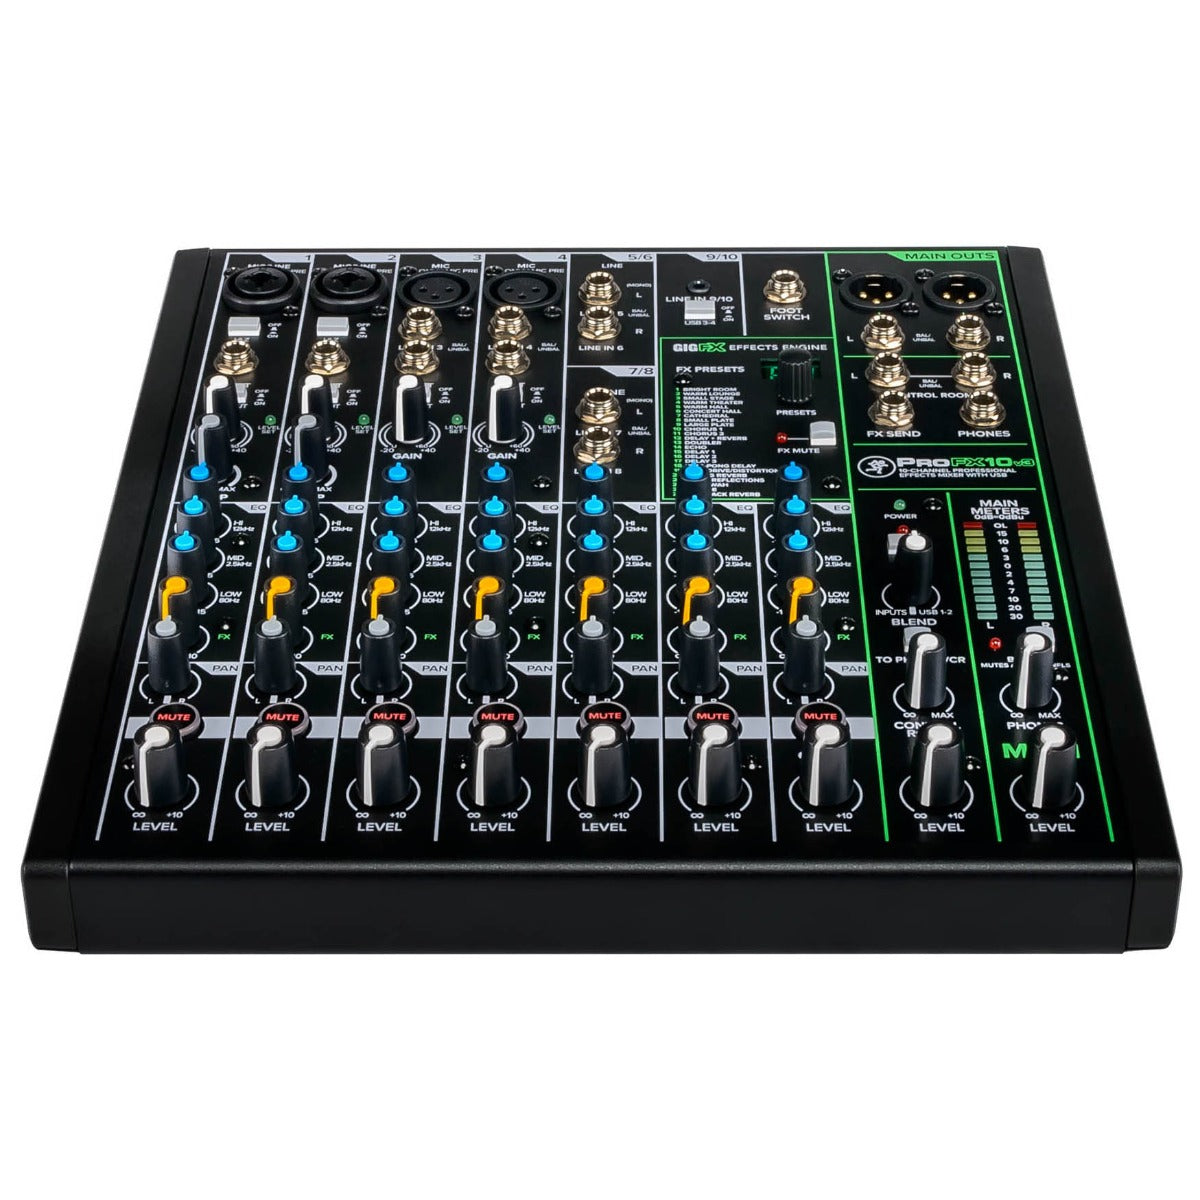 Mackie ProFX10v3 Effects Mixer with USB CABLE KIT